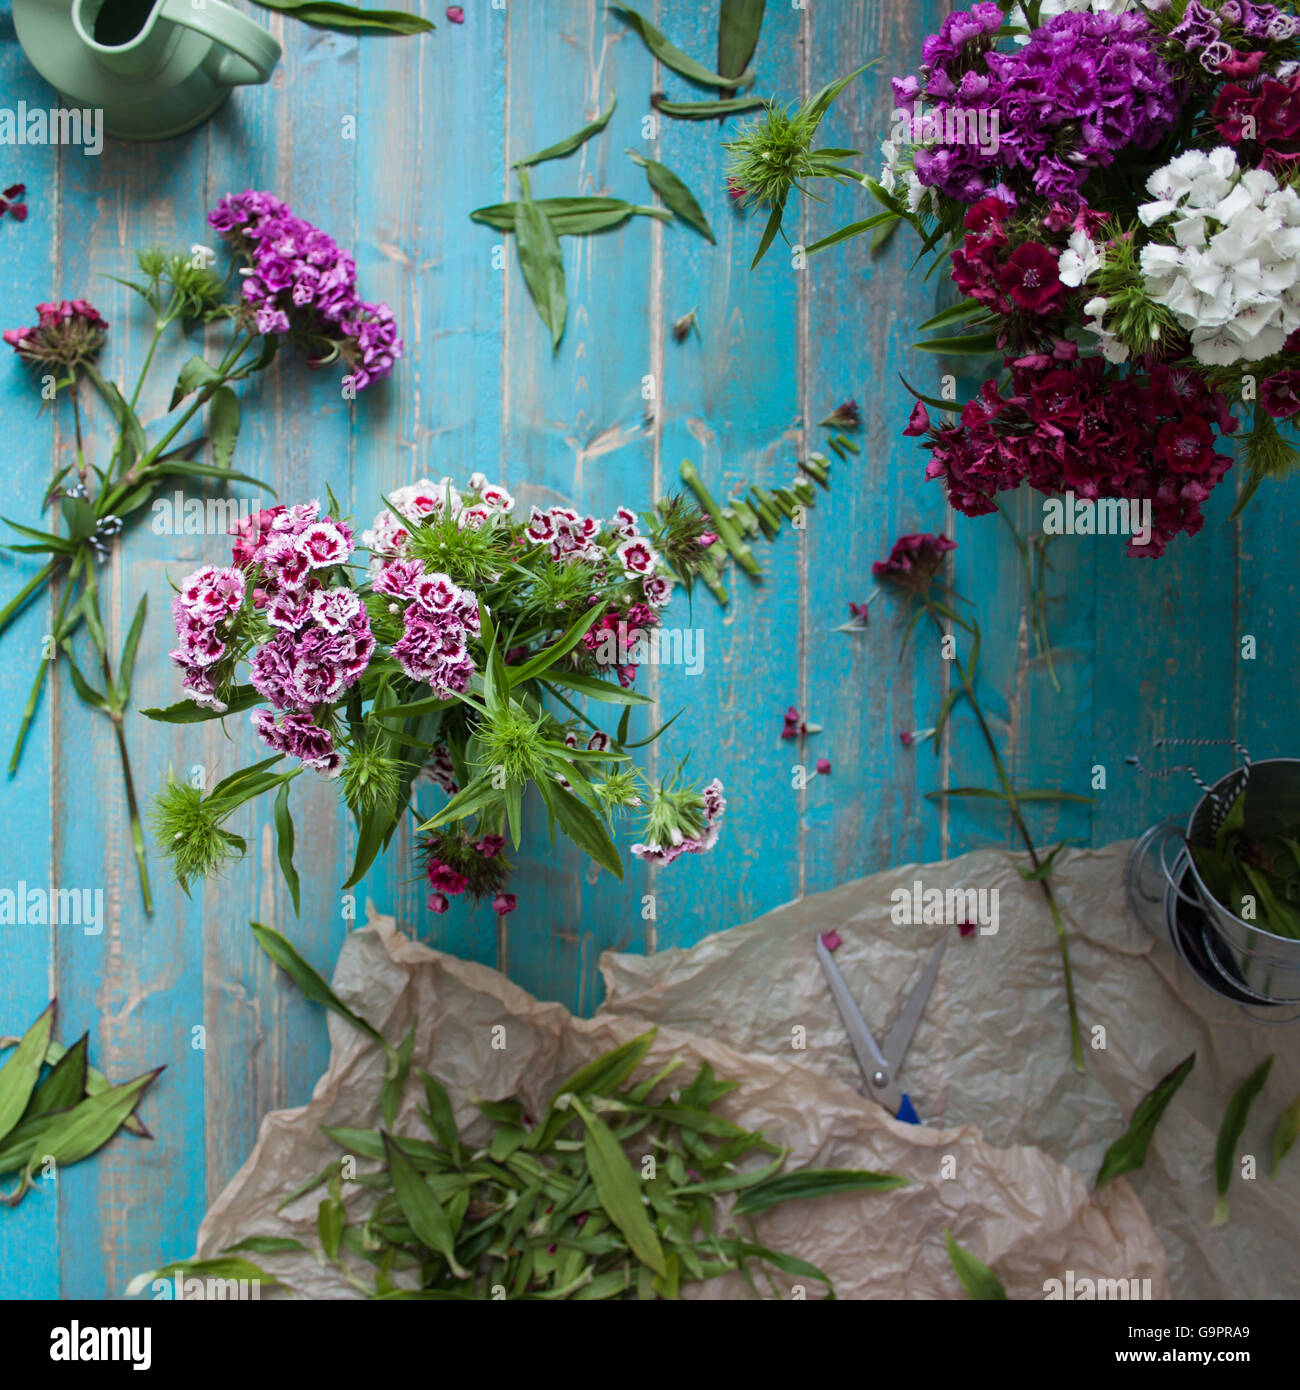 Lifestyle Floristry Image with Sweet William flowers, Country Life, for Blog Post, Social Media, Newsletter, Small Business, Printed Media Stock Photo